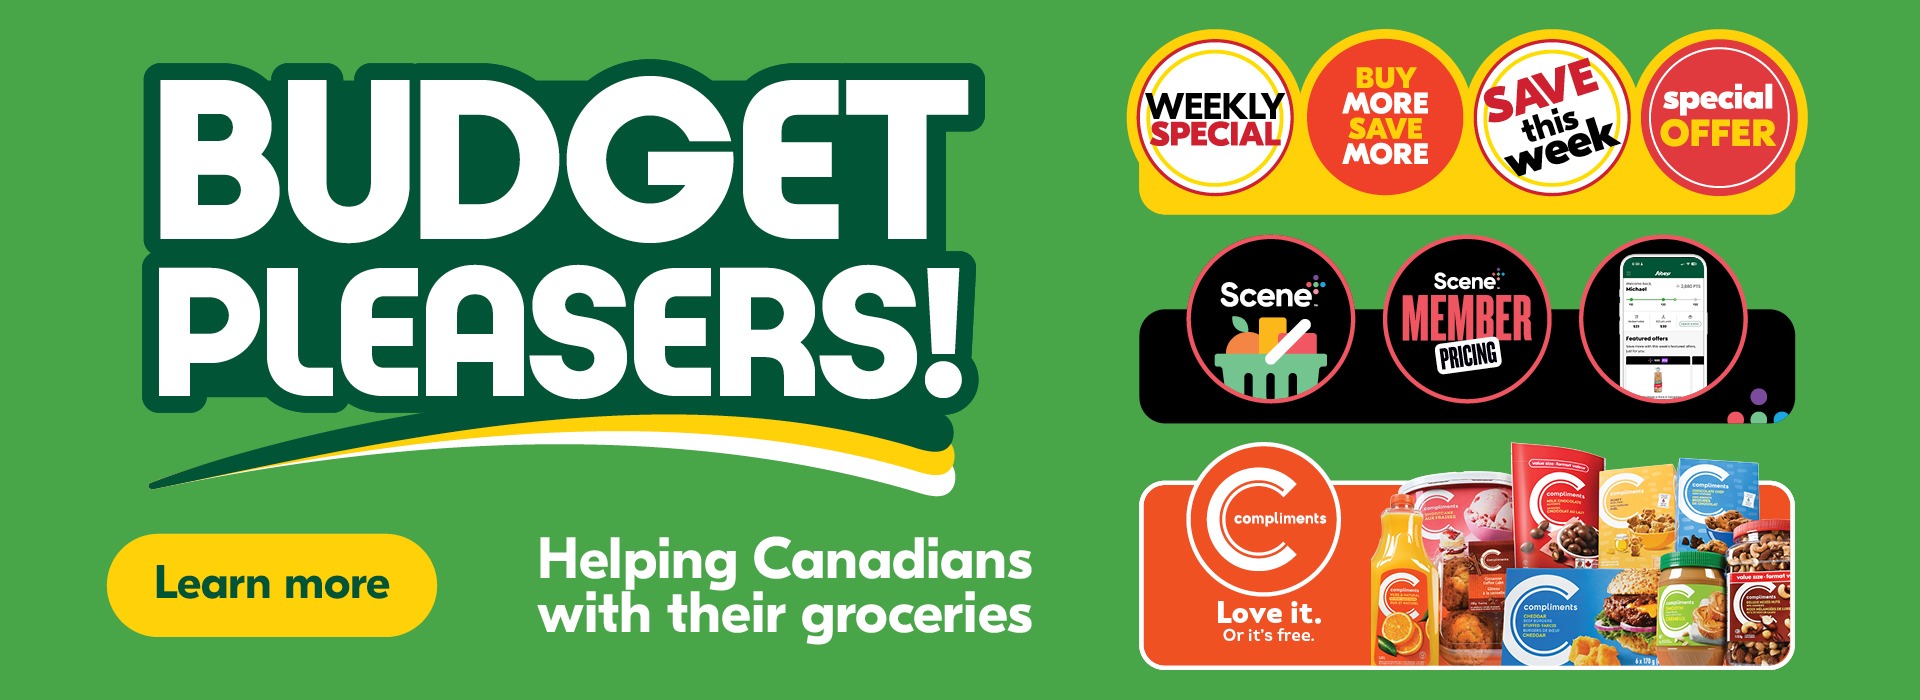 Helping canadians with their groceries